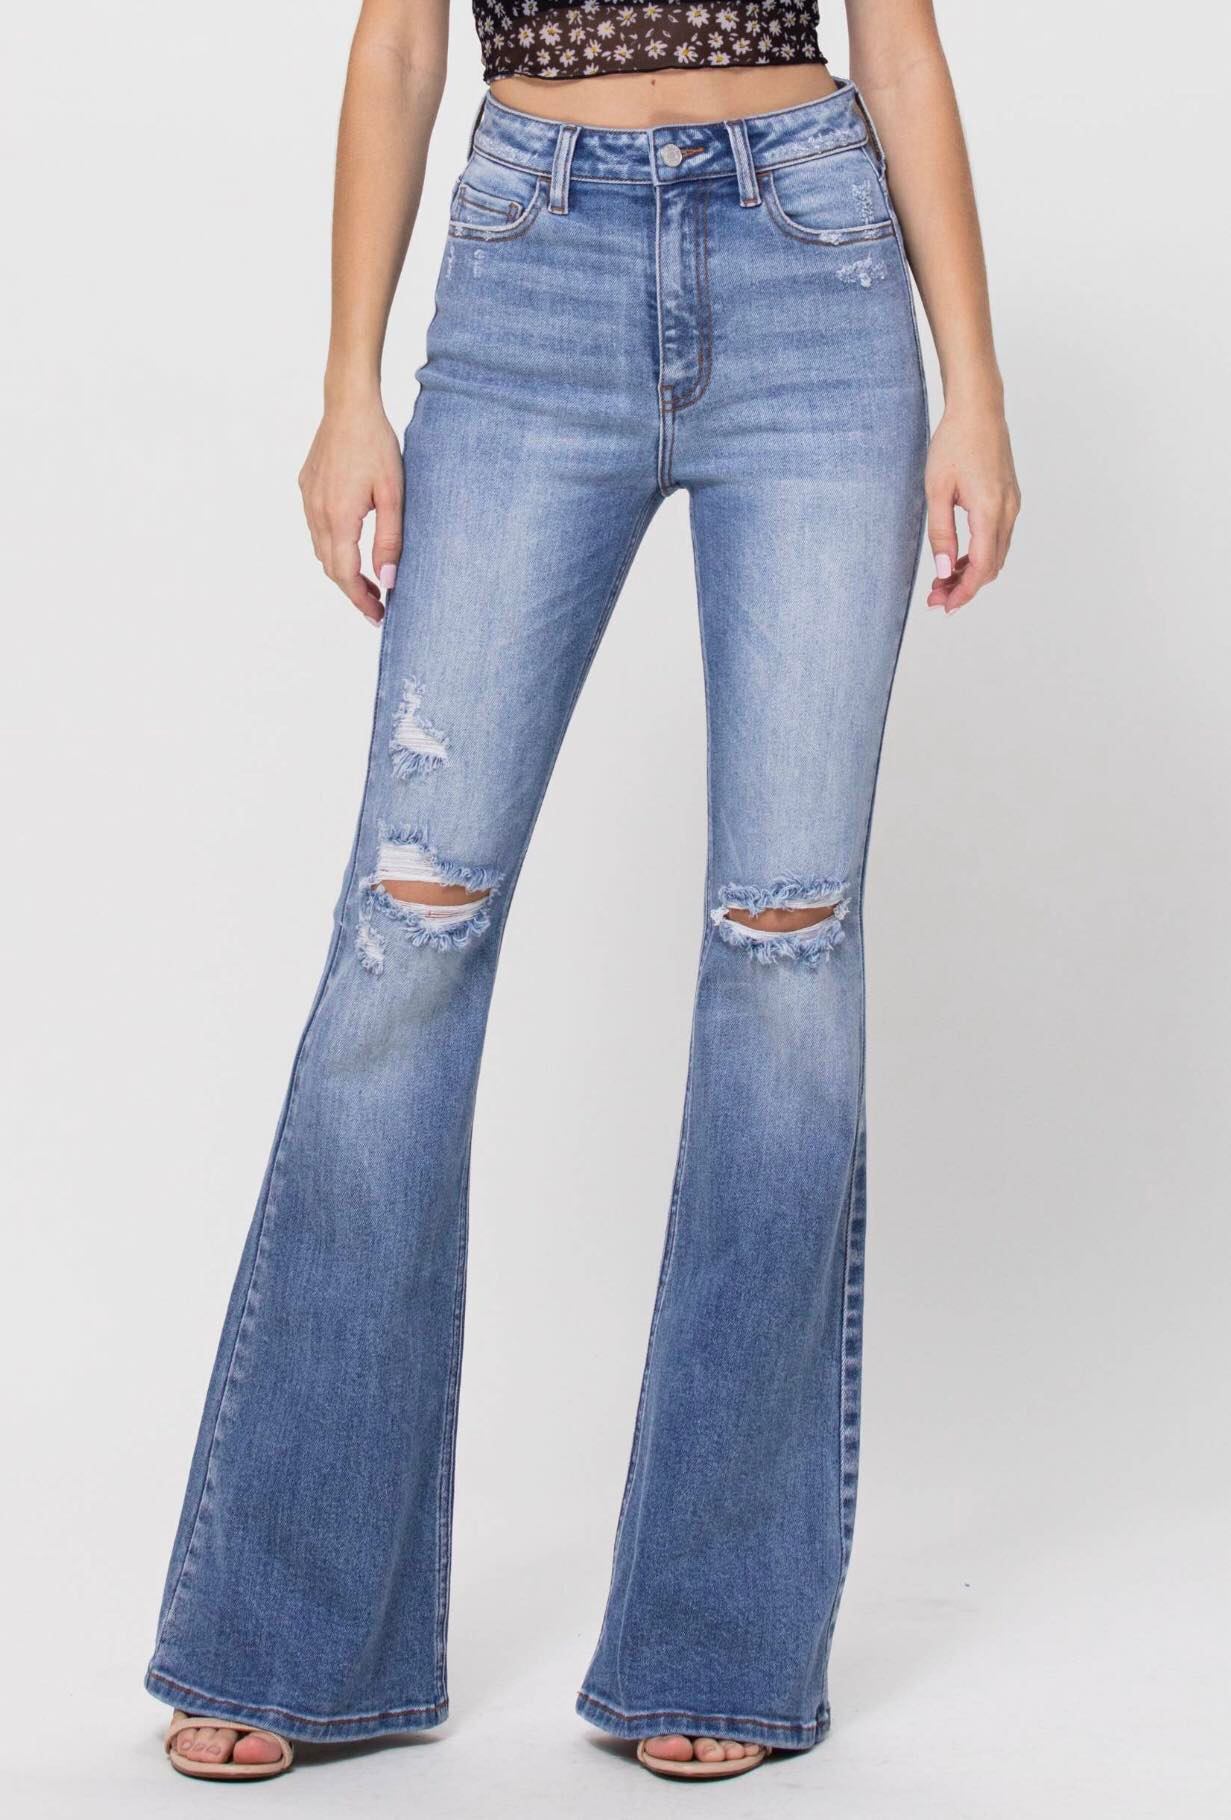 Cello Slim Super Flare Jeans | Chasing Fireflies Boutique